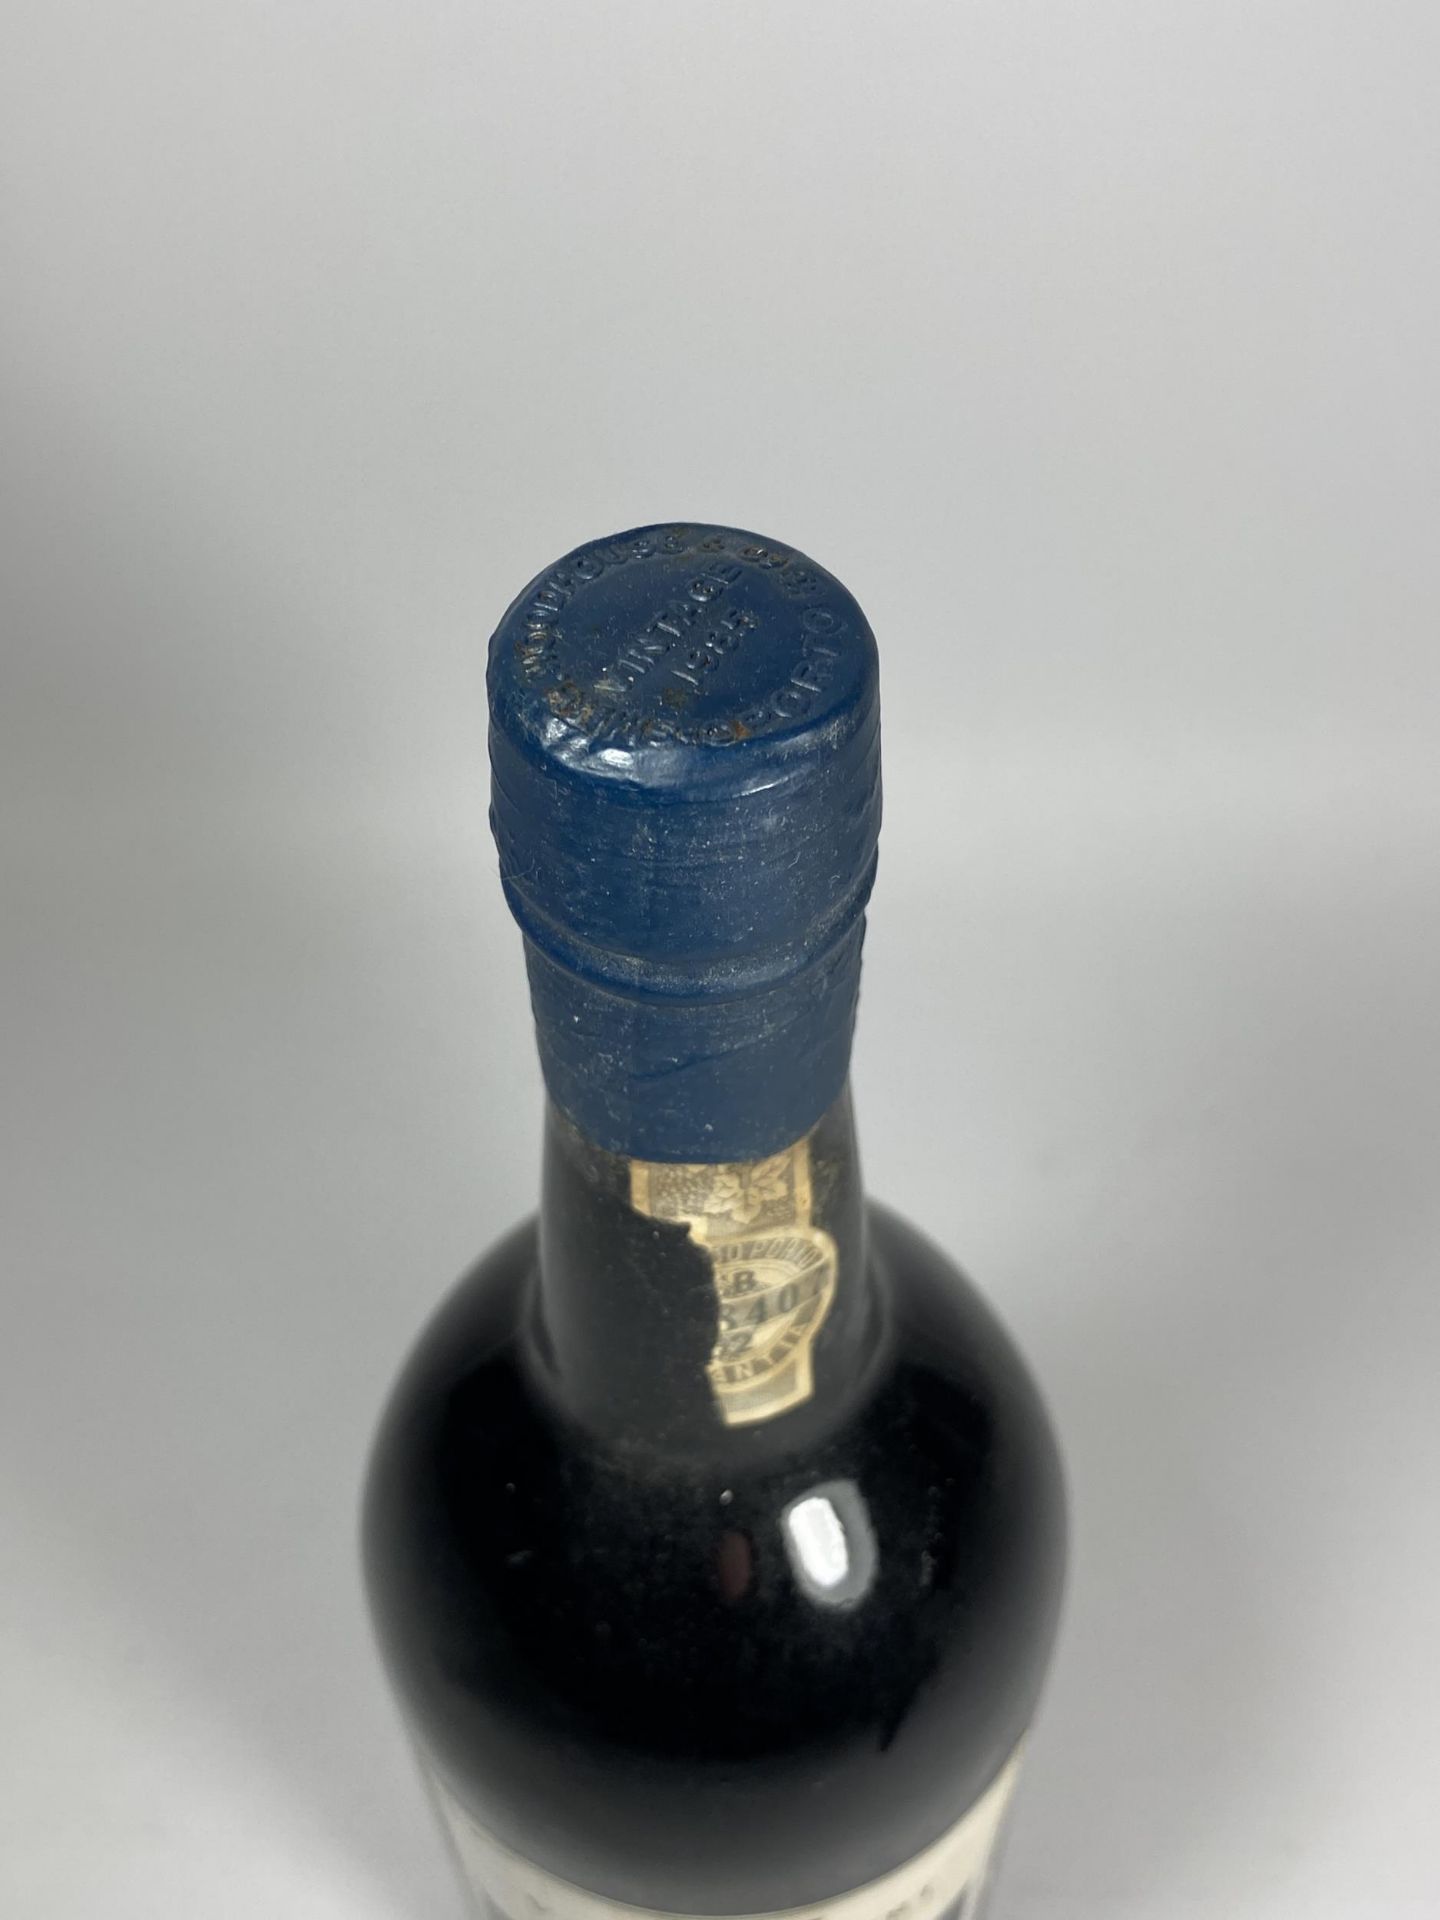 1 X 75CL BOTTLE - SWC SMITH WOODHOUSE 1985 VINTAGE PORT - Image 3 of 4